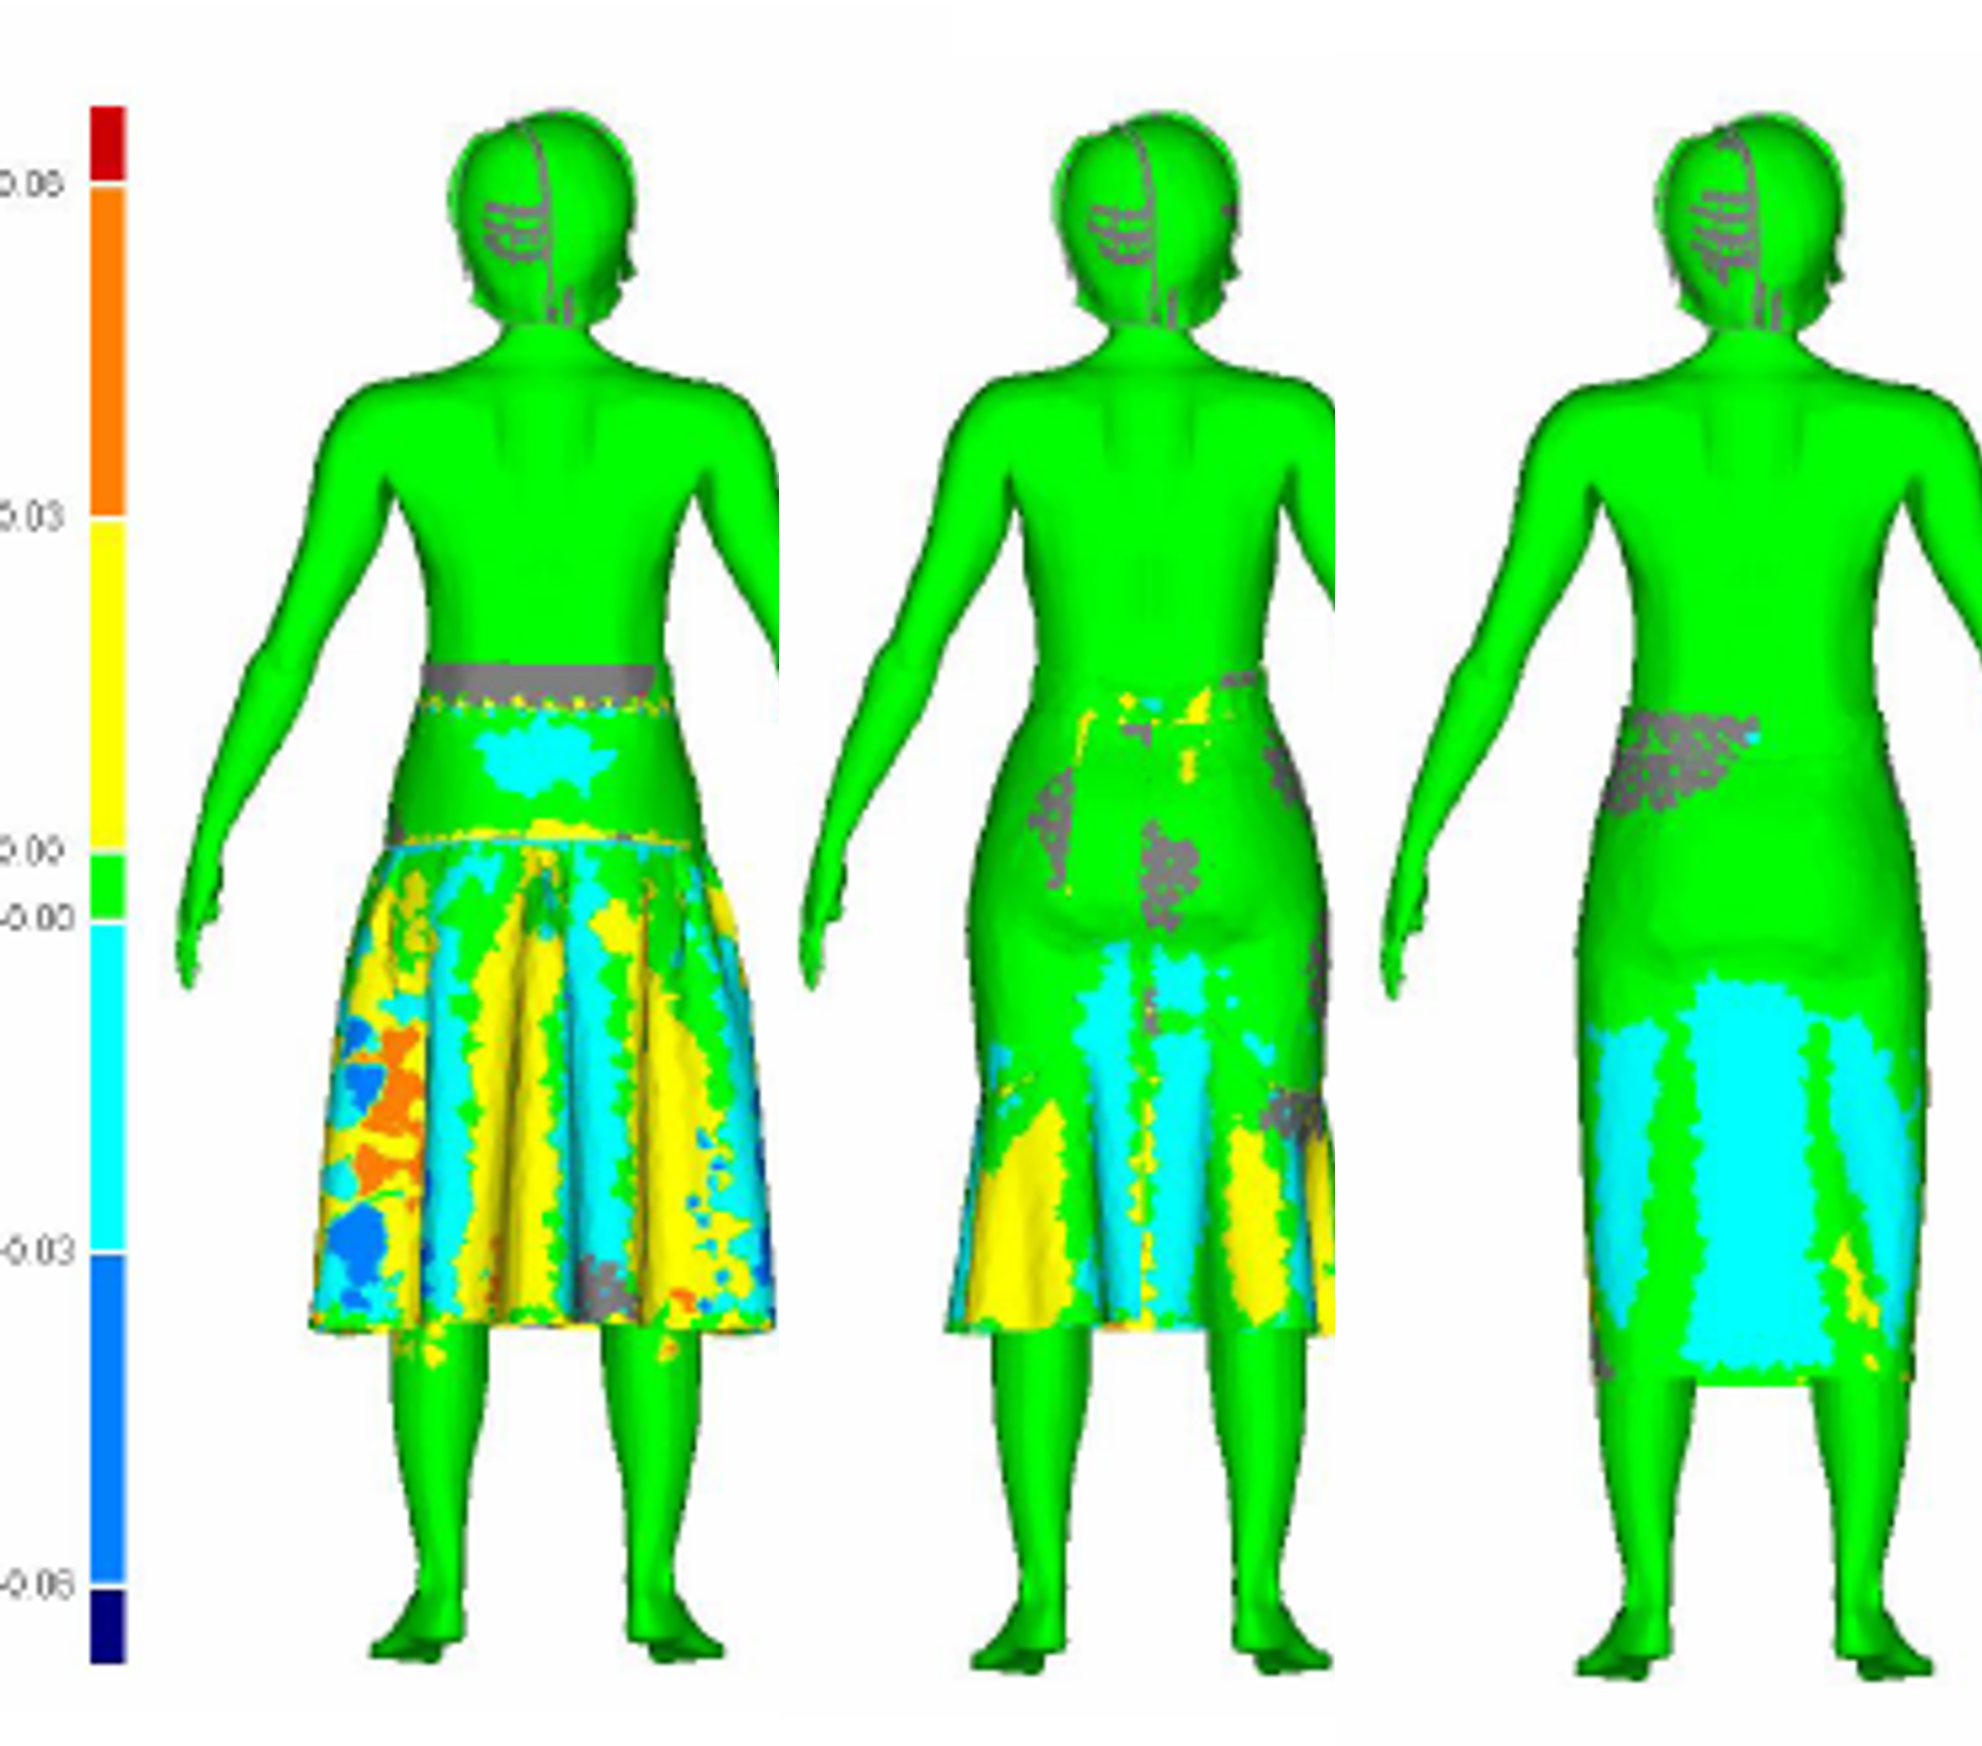 Visual appearance of different skirt styles